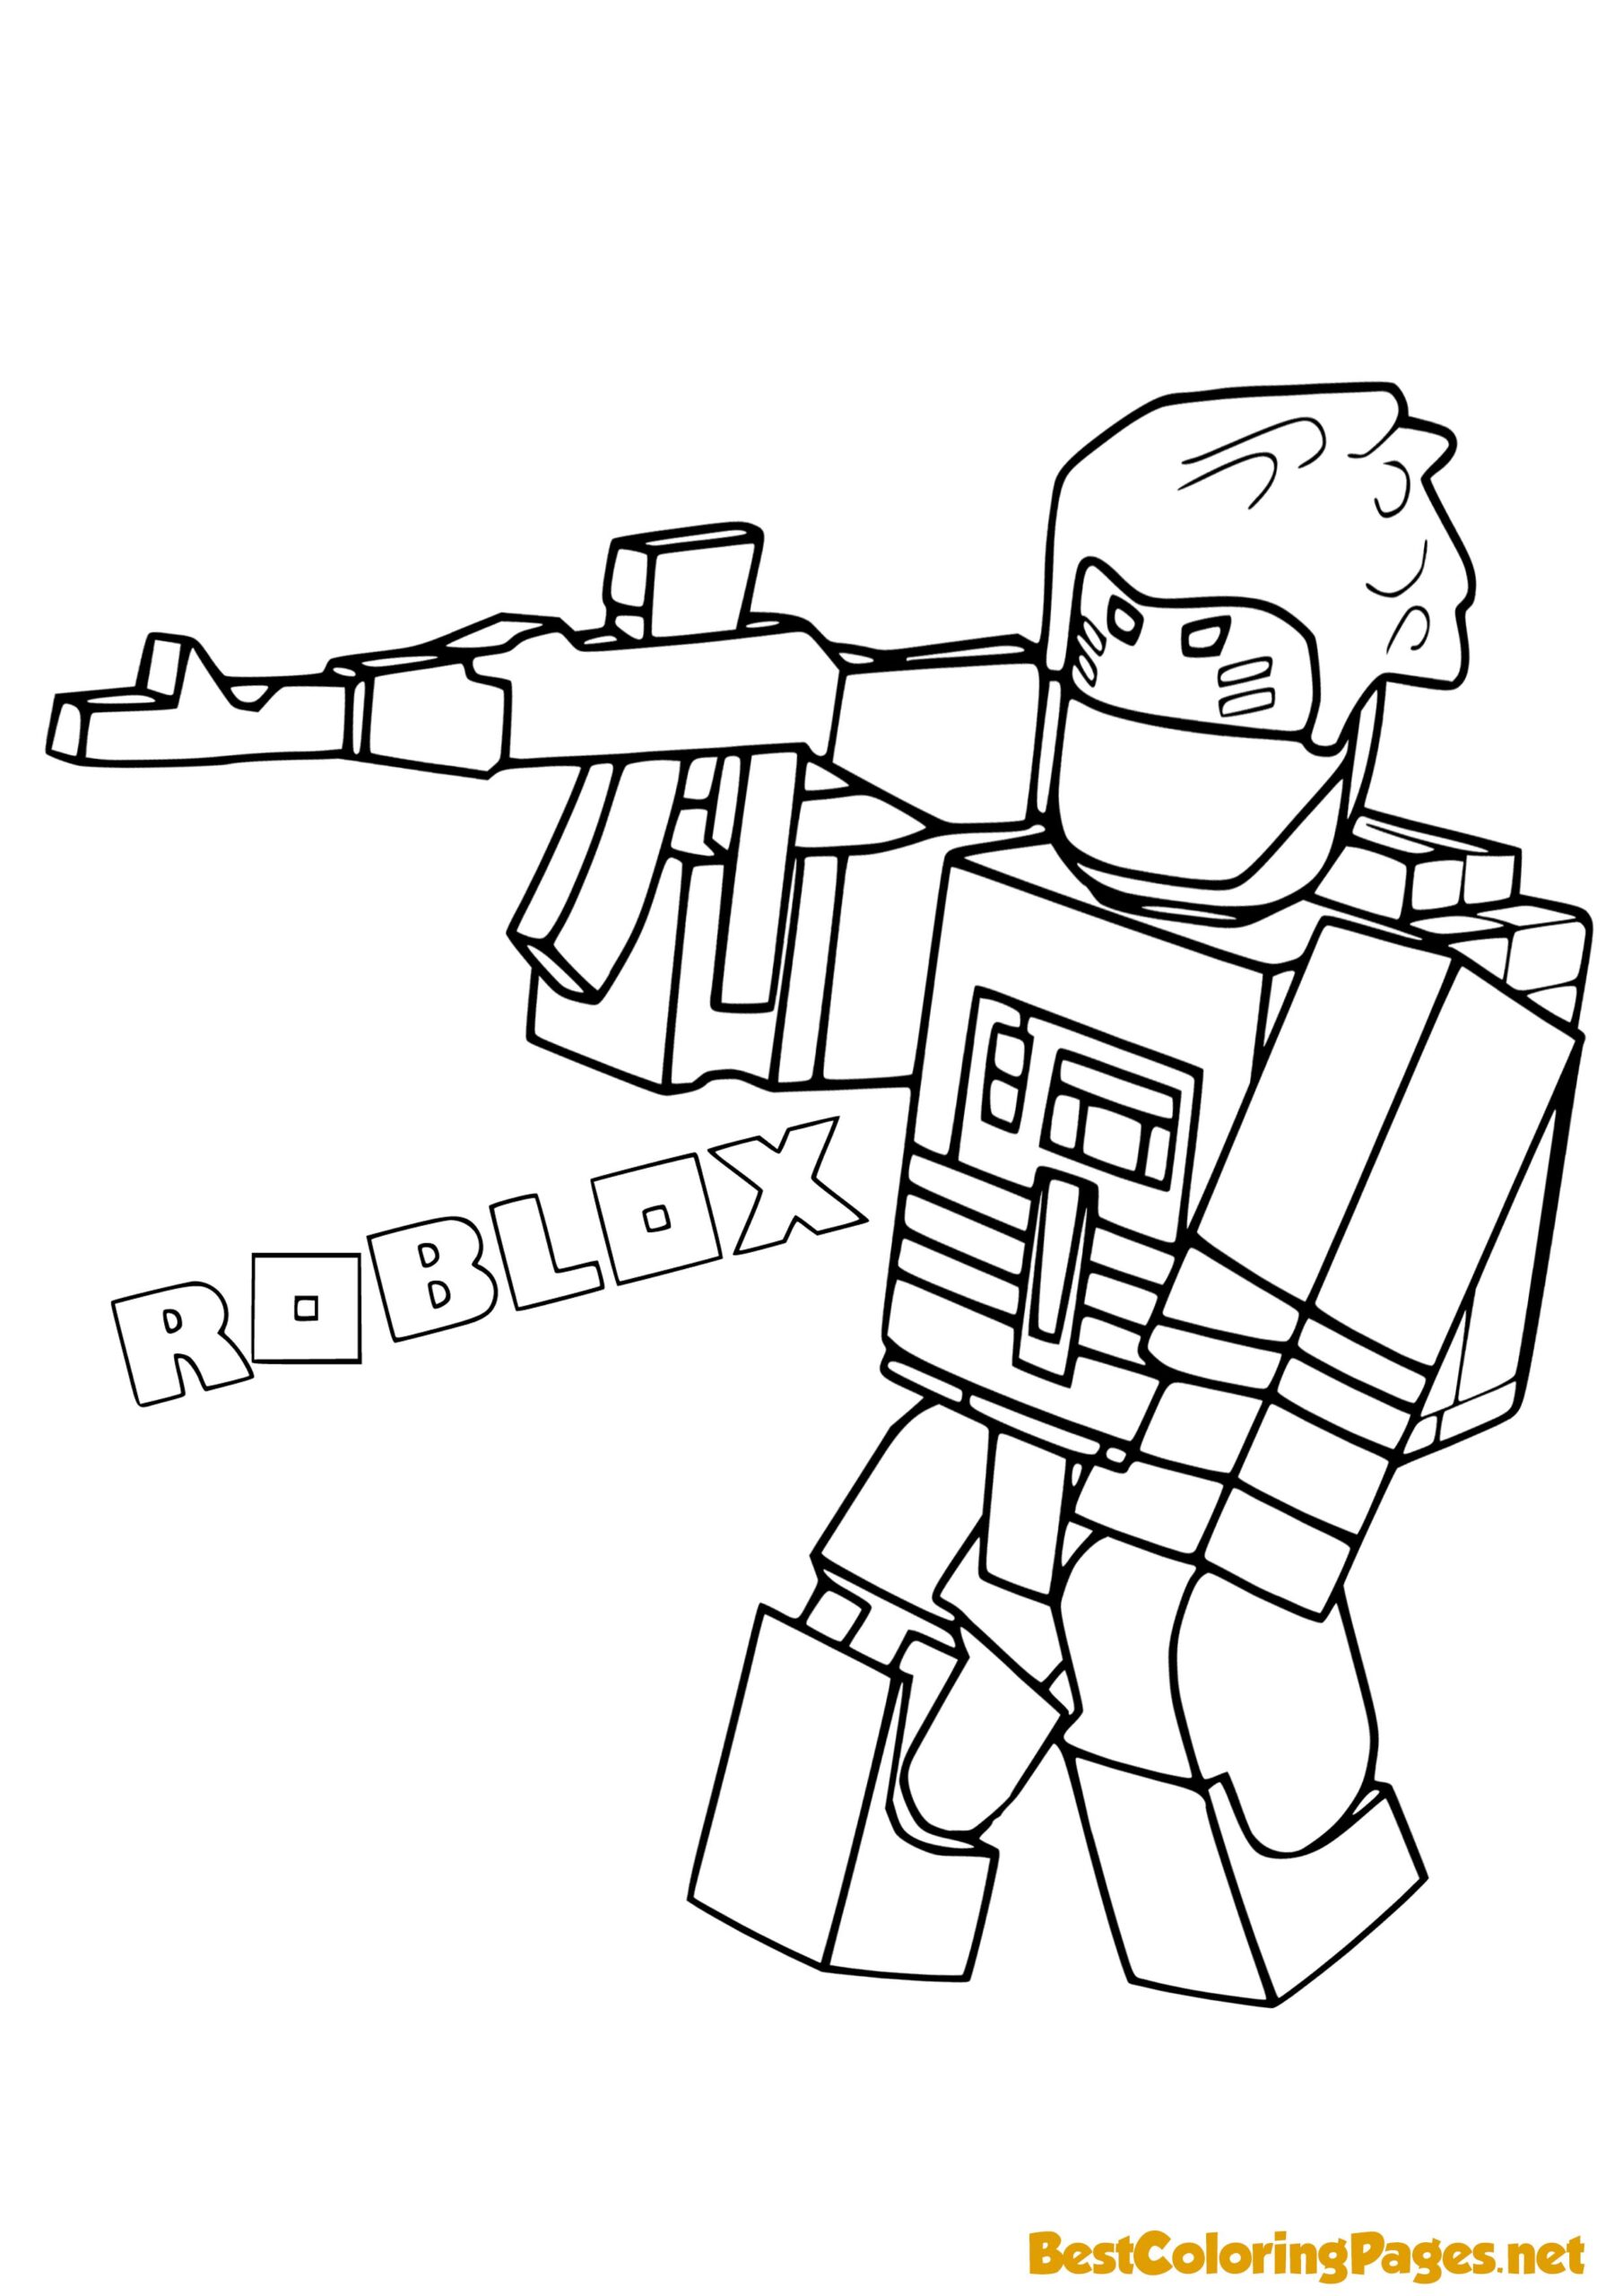 Roblox Coloring Pages - Bestcoloringpages.net